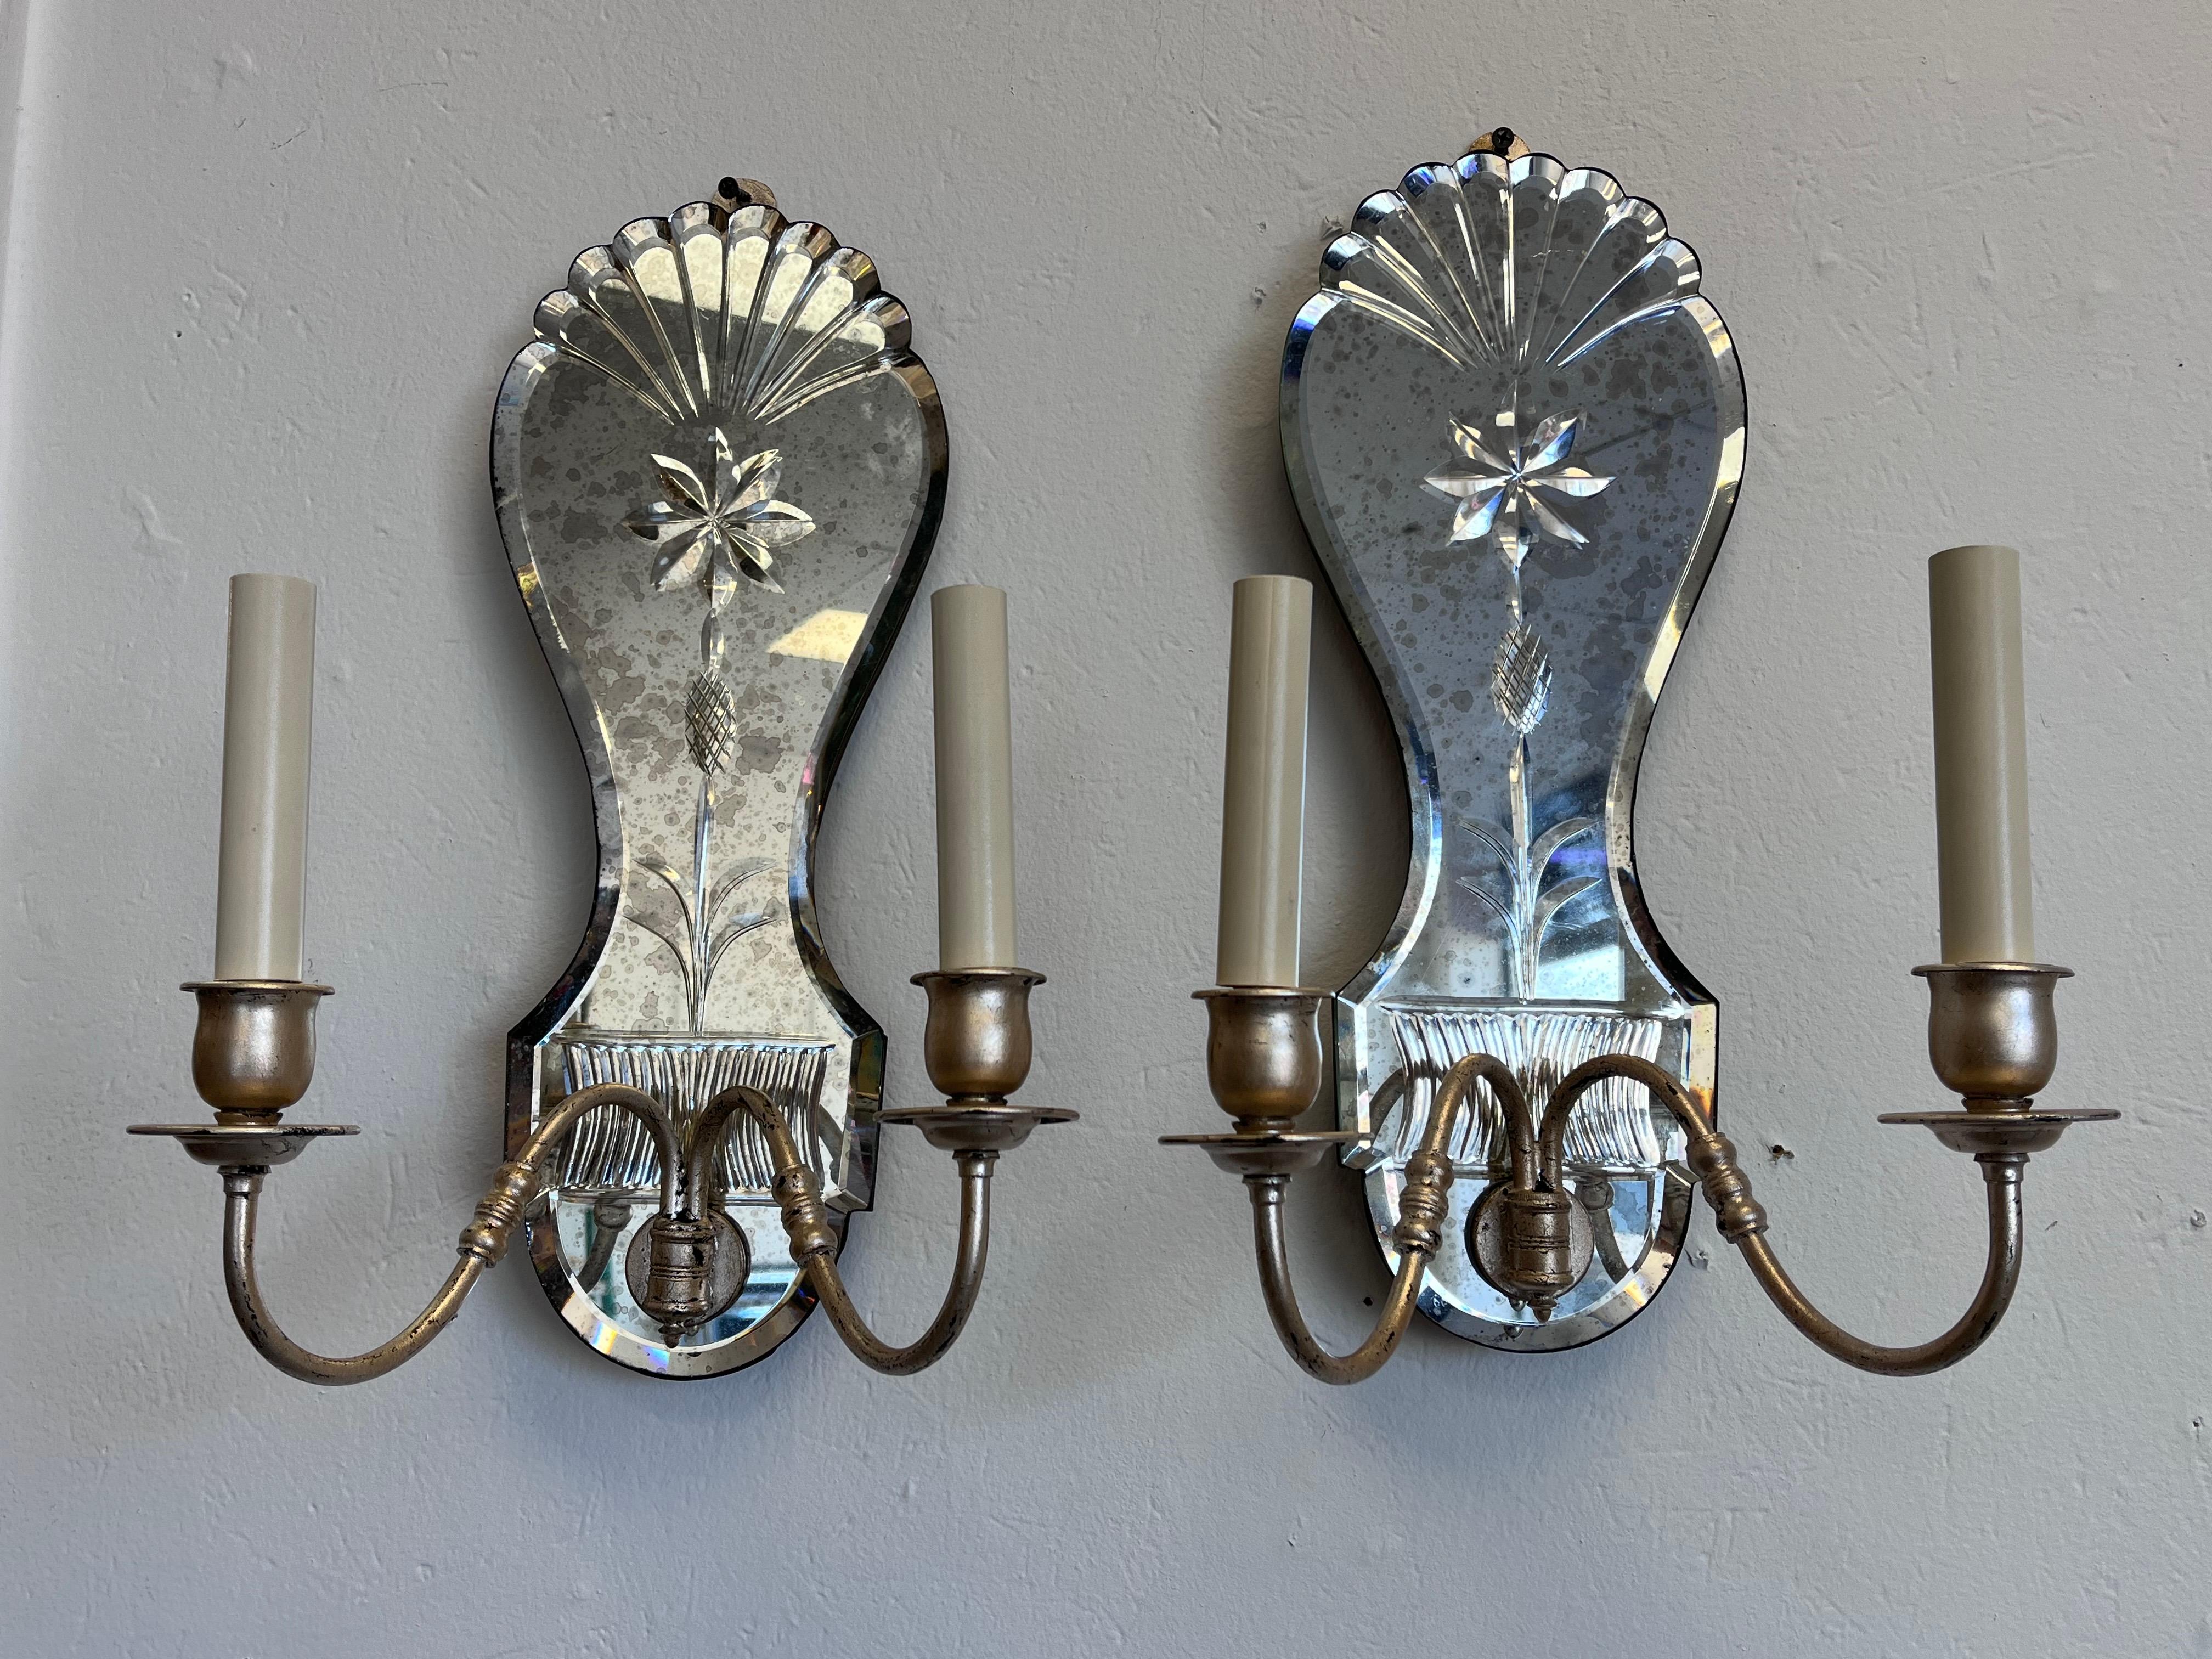 A large pair of ornately designed antiqued and cut mirror wall sconces with silver gilt scrolling, double arms. The top of each of the wall lights is cut in a fan shaped or scalloped design. This element is atop an eight petal flower decor. Moving